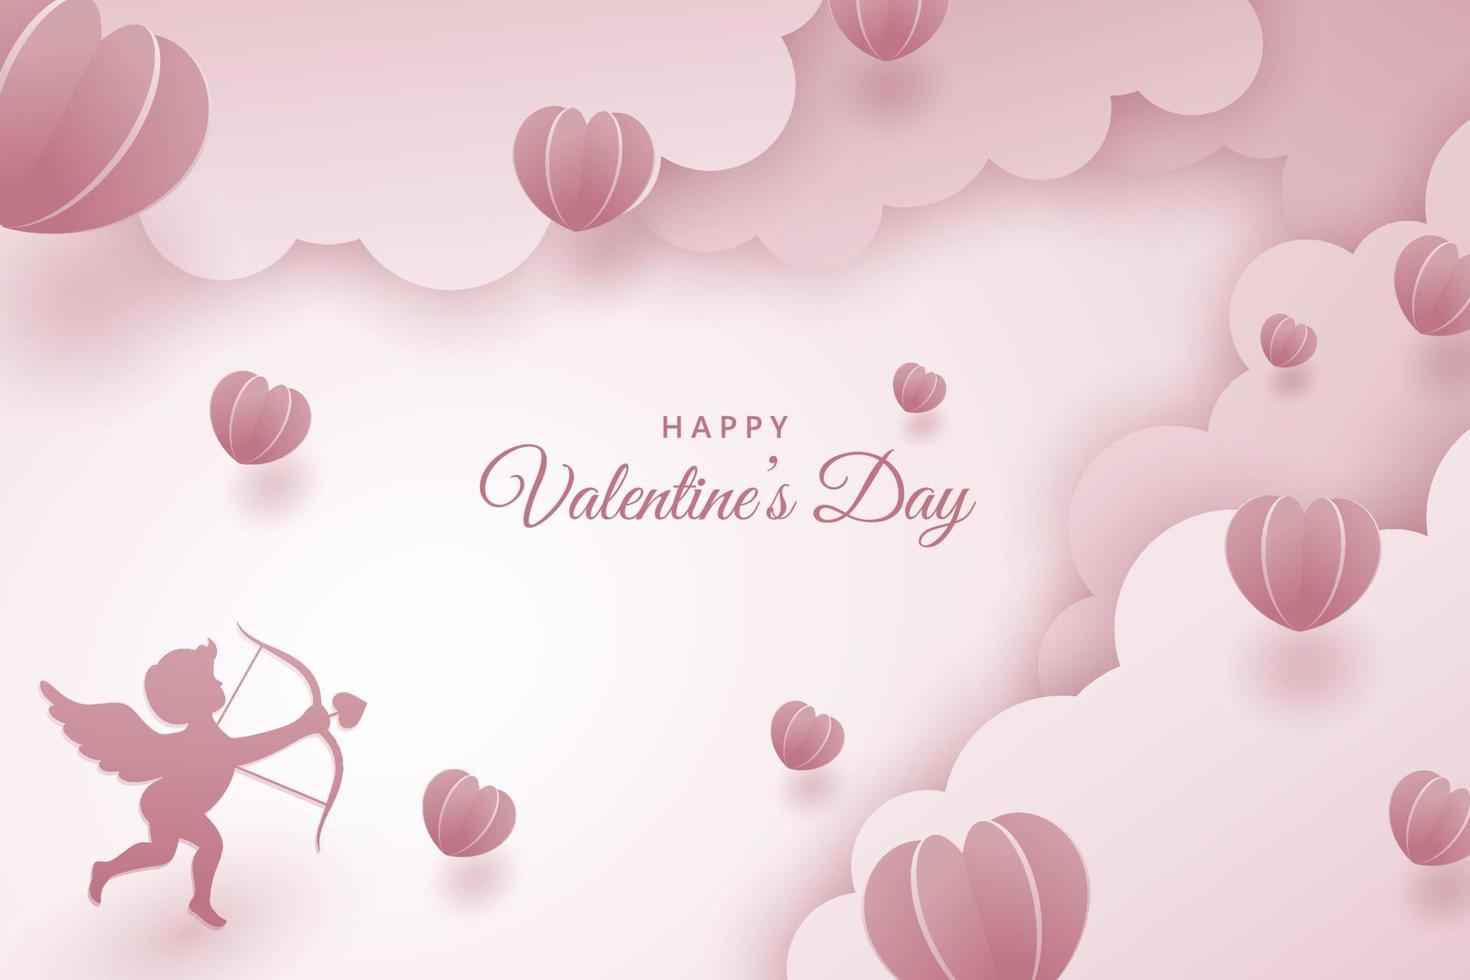 Paper art style valentines day background with cupid and heart illustration vector